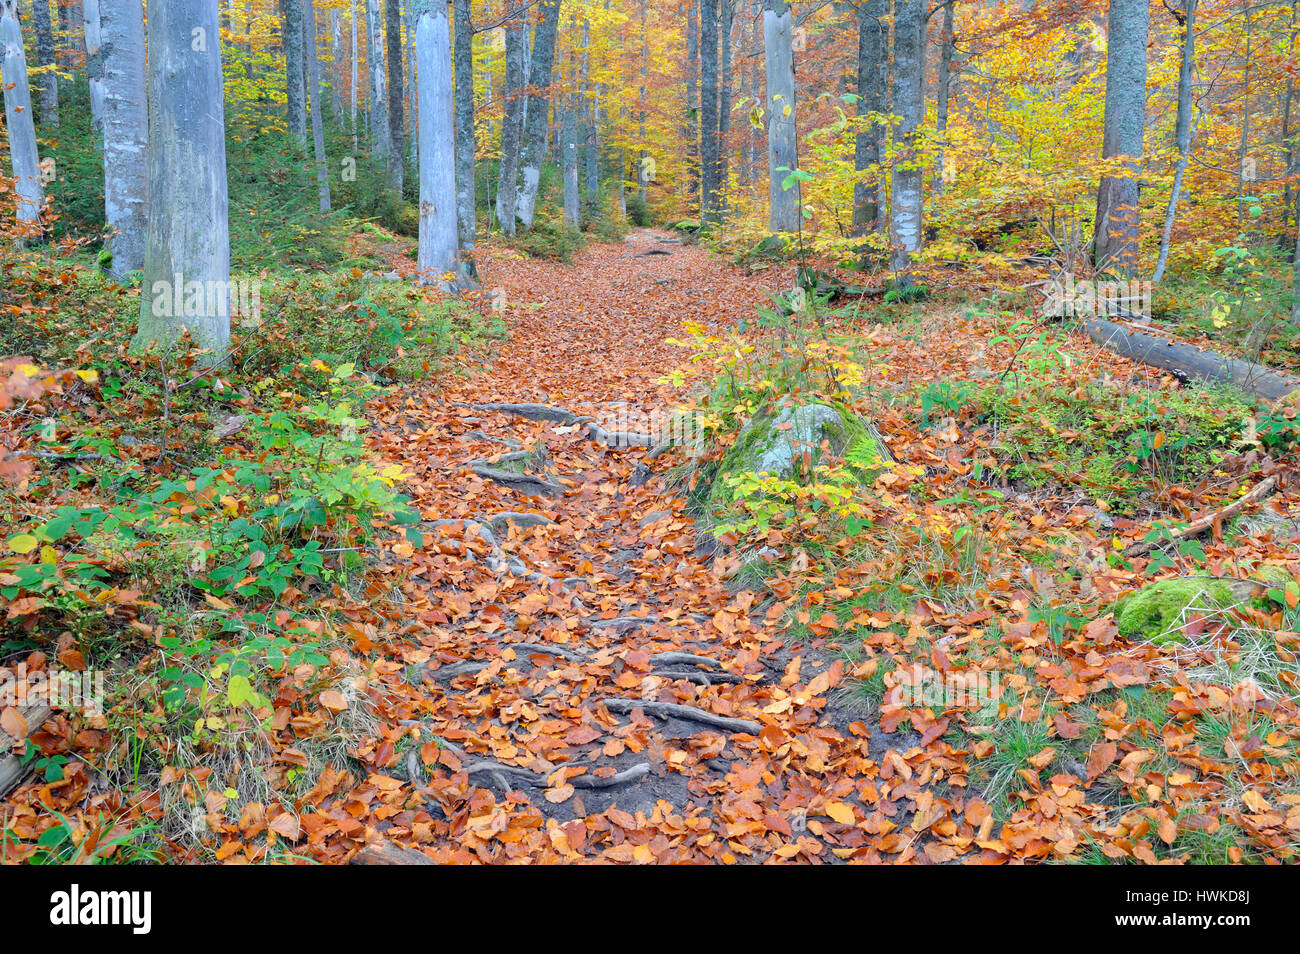 Beech forest in autumn, october, Bavarian Forest National Park, Germany Stock Photo